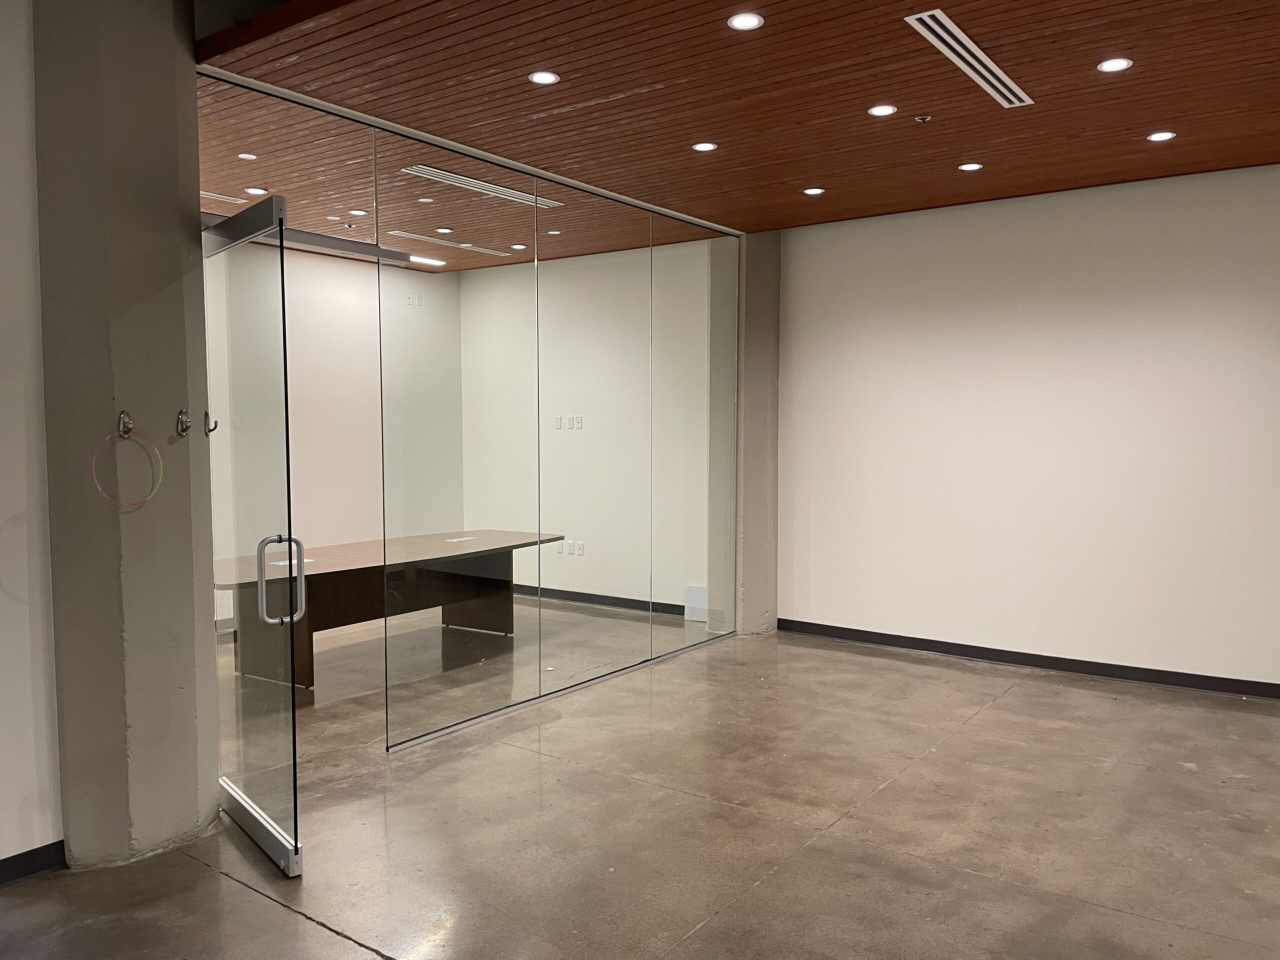 waterman-120-Conference-Room-2